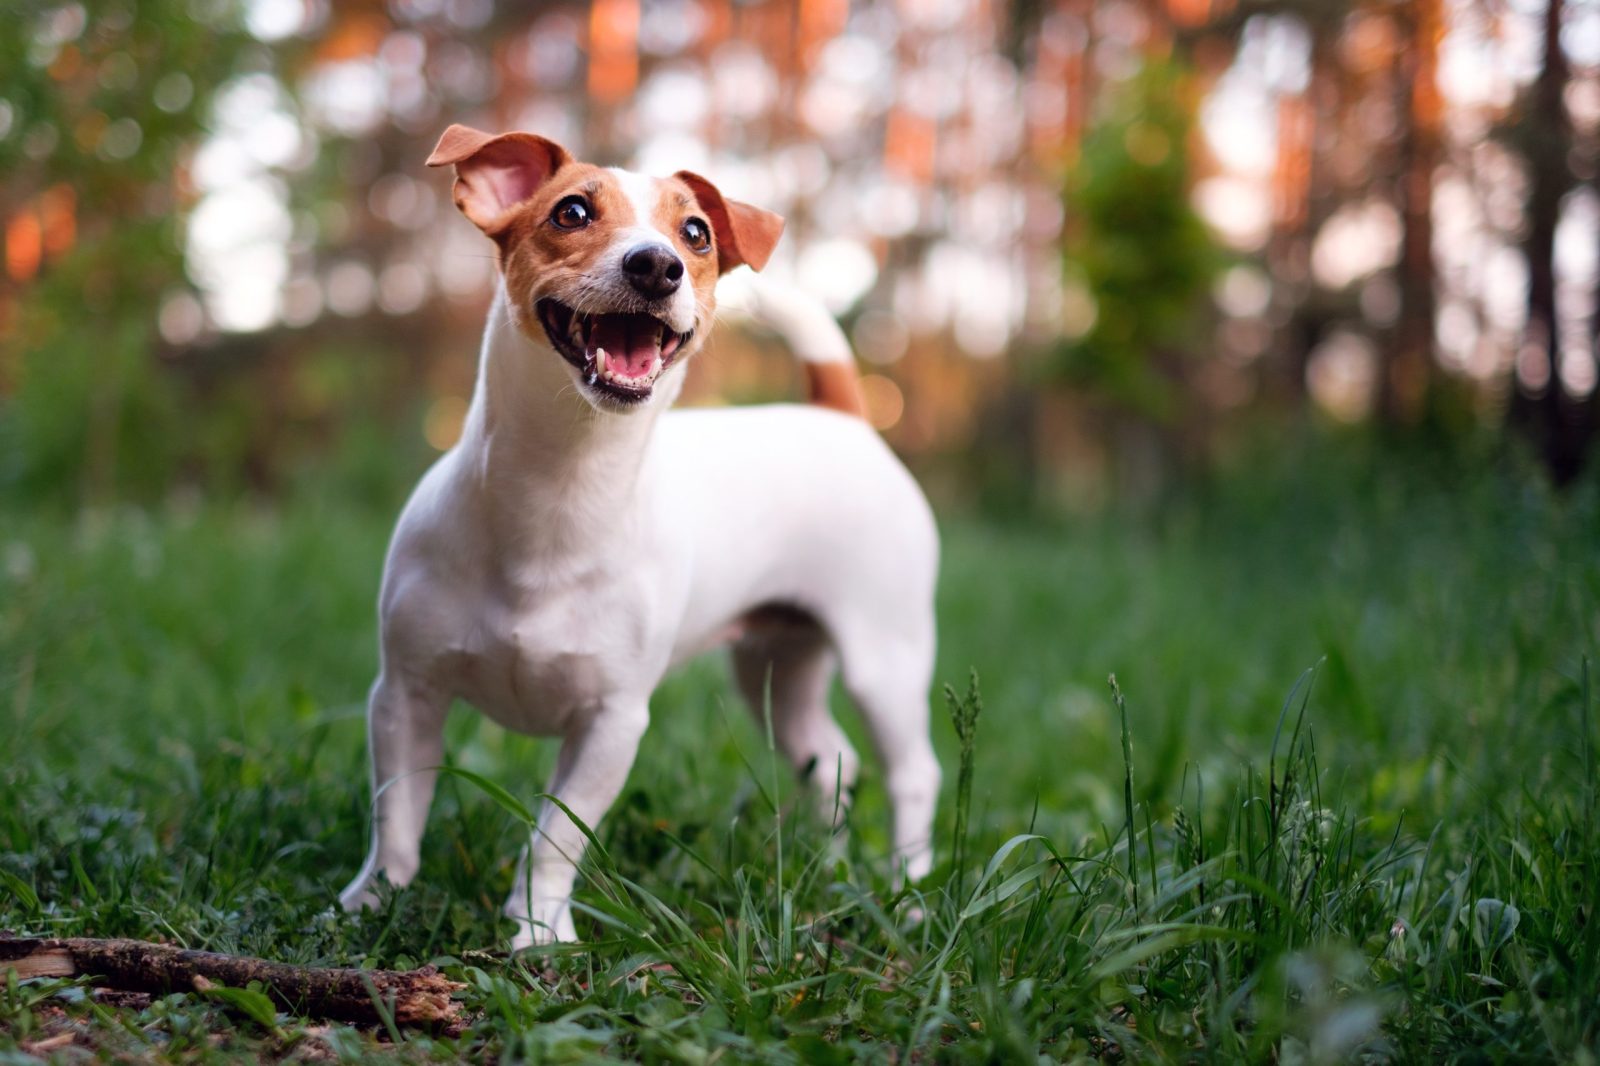 Happy dog, jack russell playing in the park